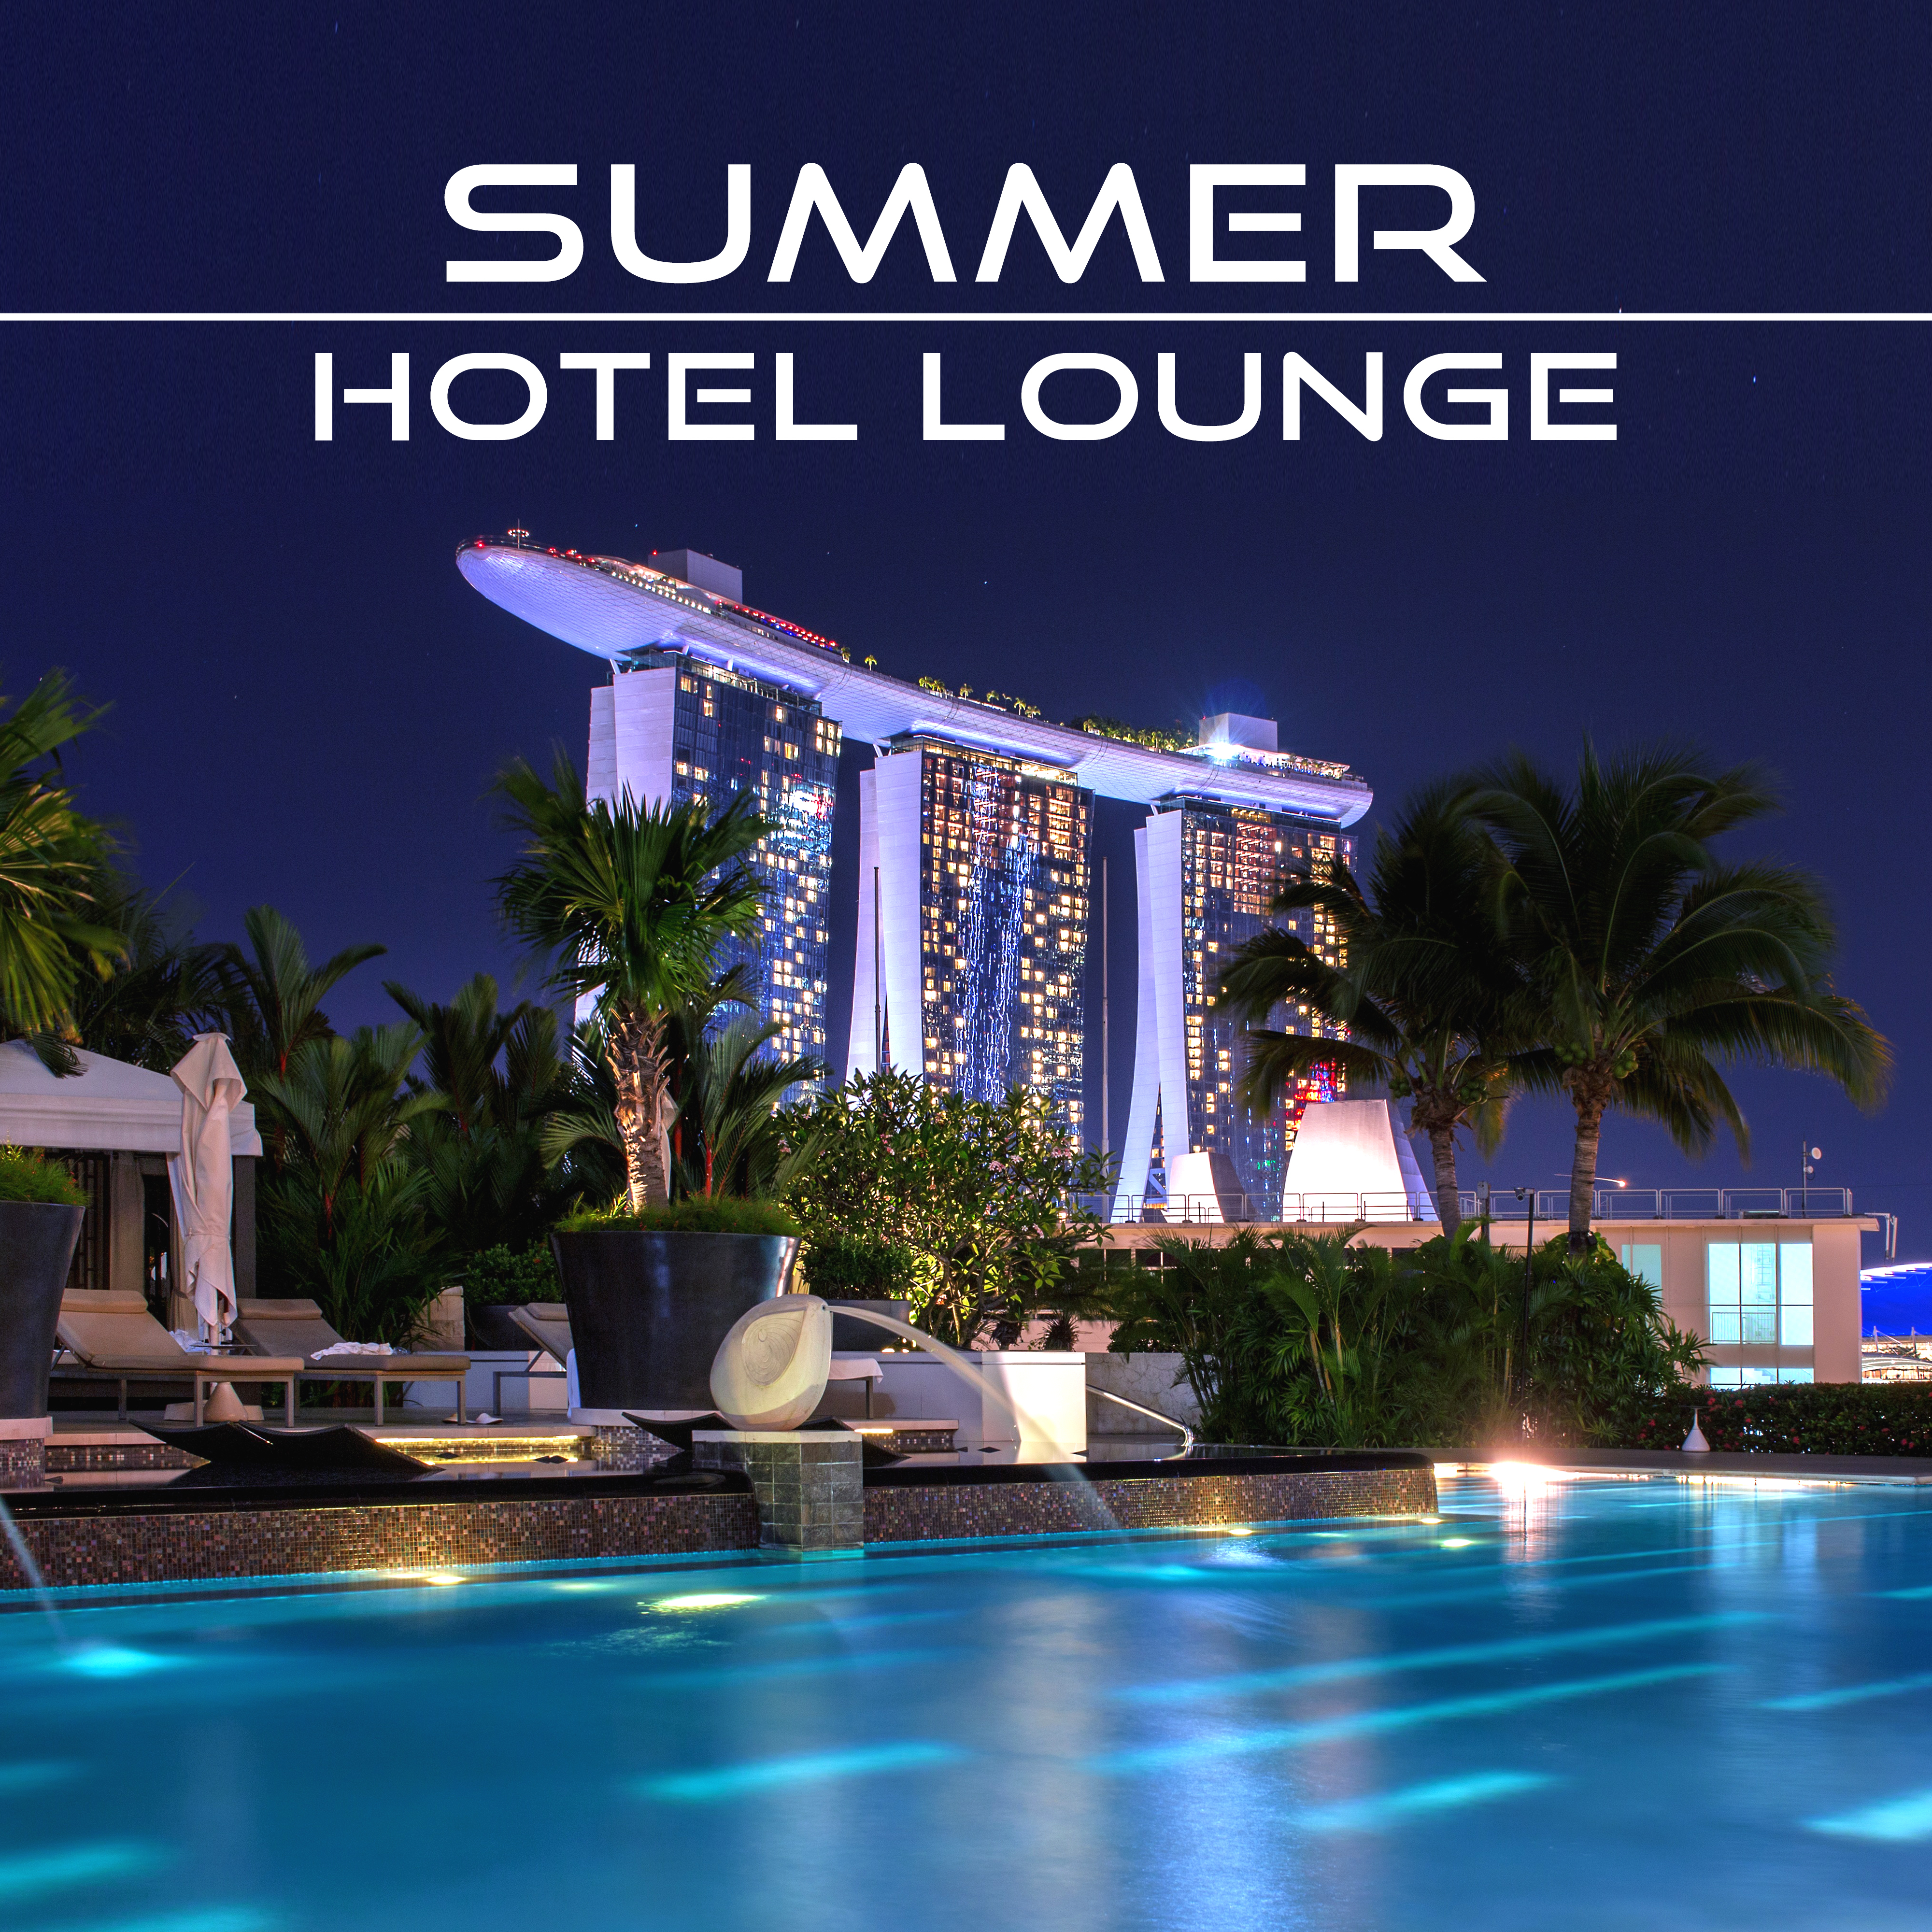 Summer Hotel Lounge – Chilled Summer Music, Holiday Relaxation, Hotel Chill Out 2017